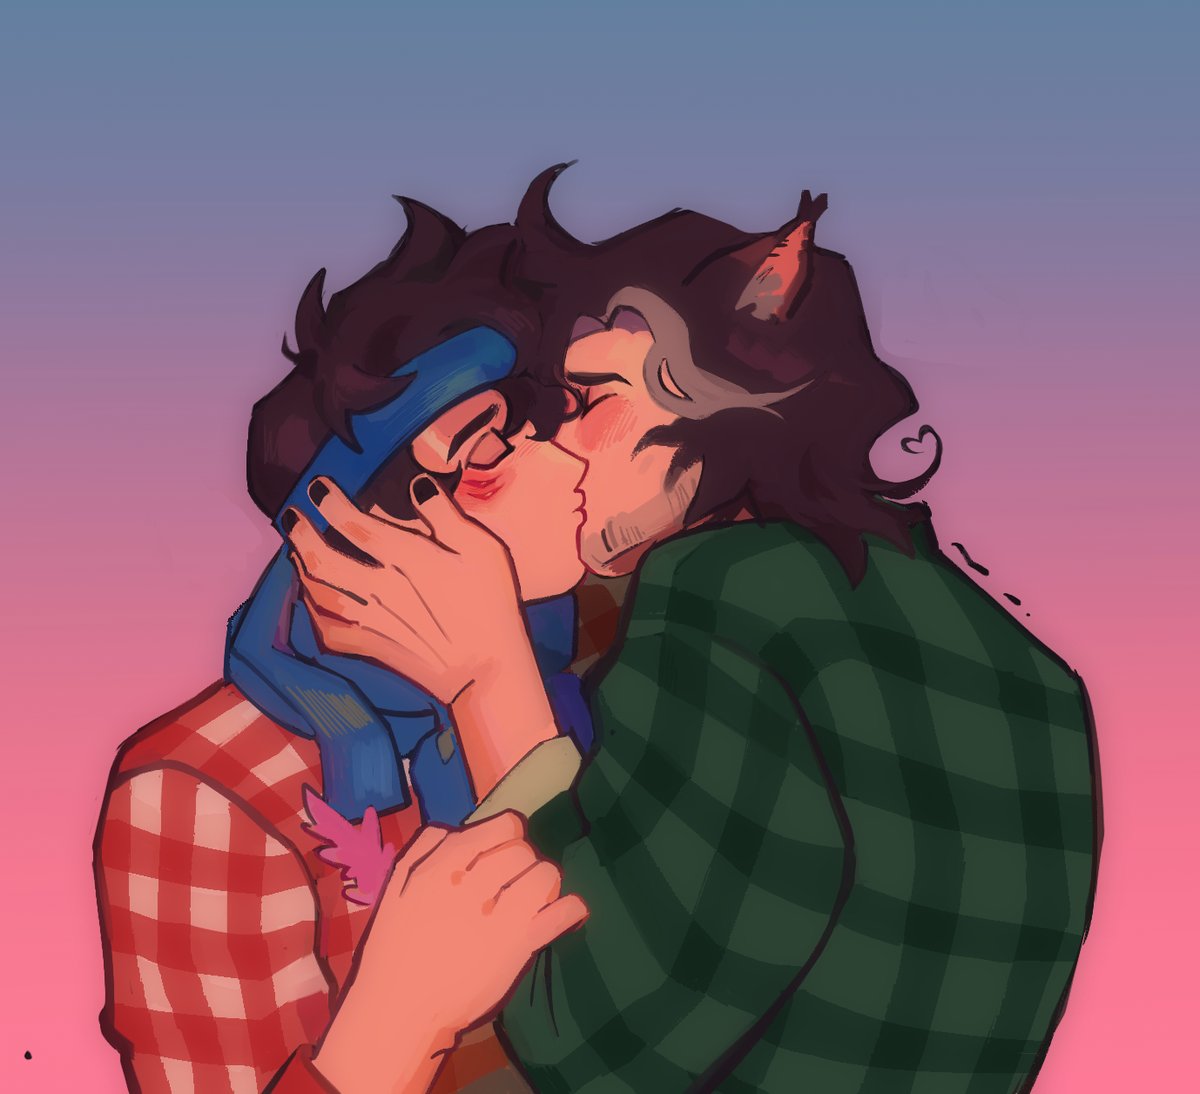 Shhh it's their first kiss let them be
#guapoduo #qsmp